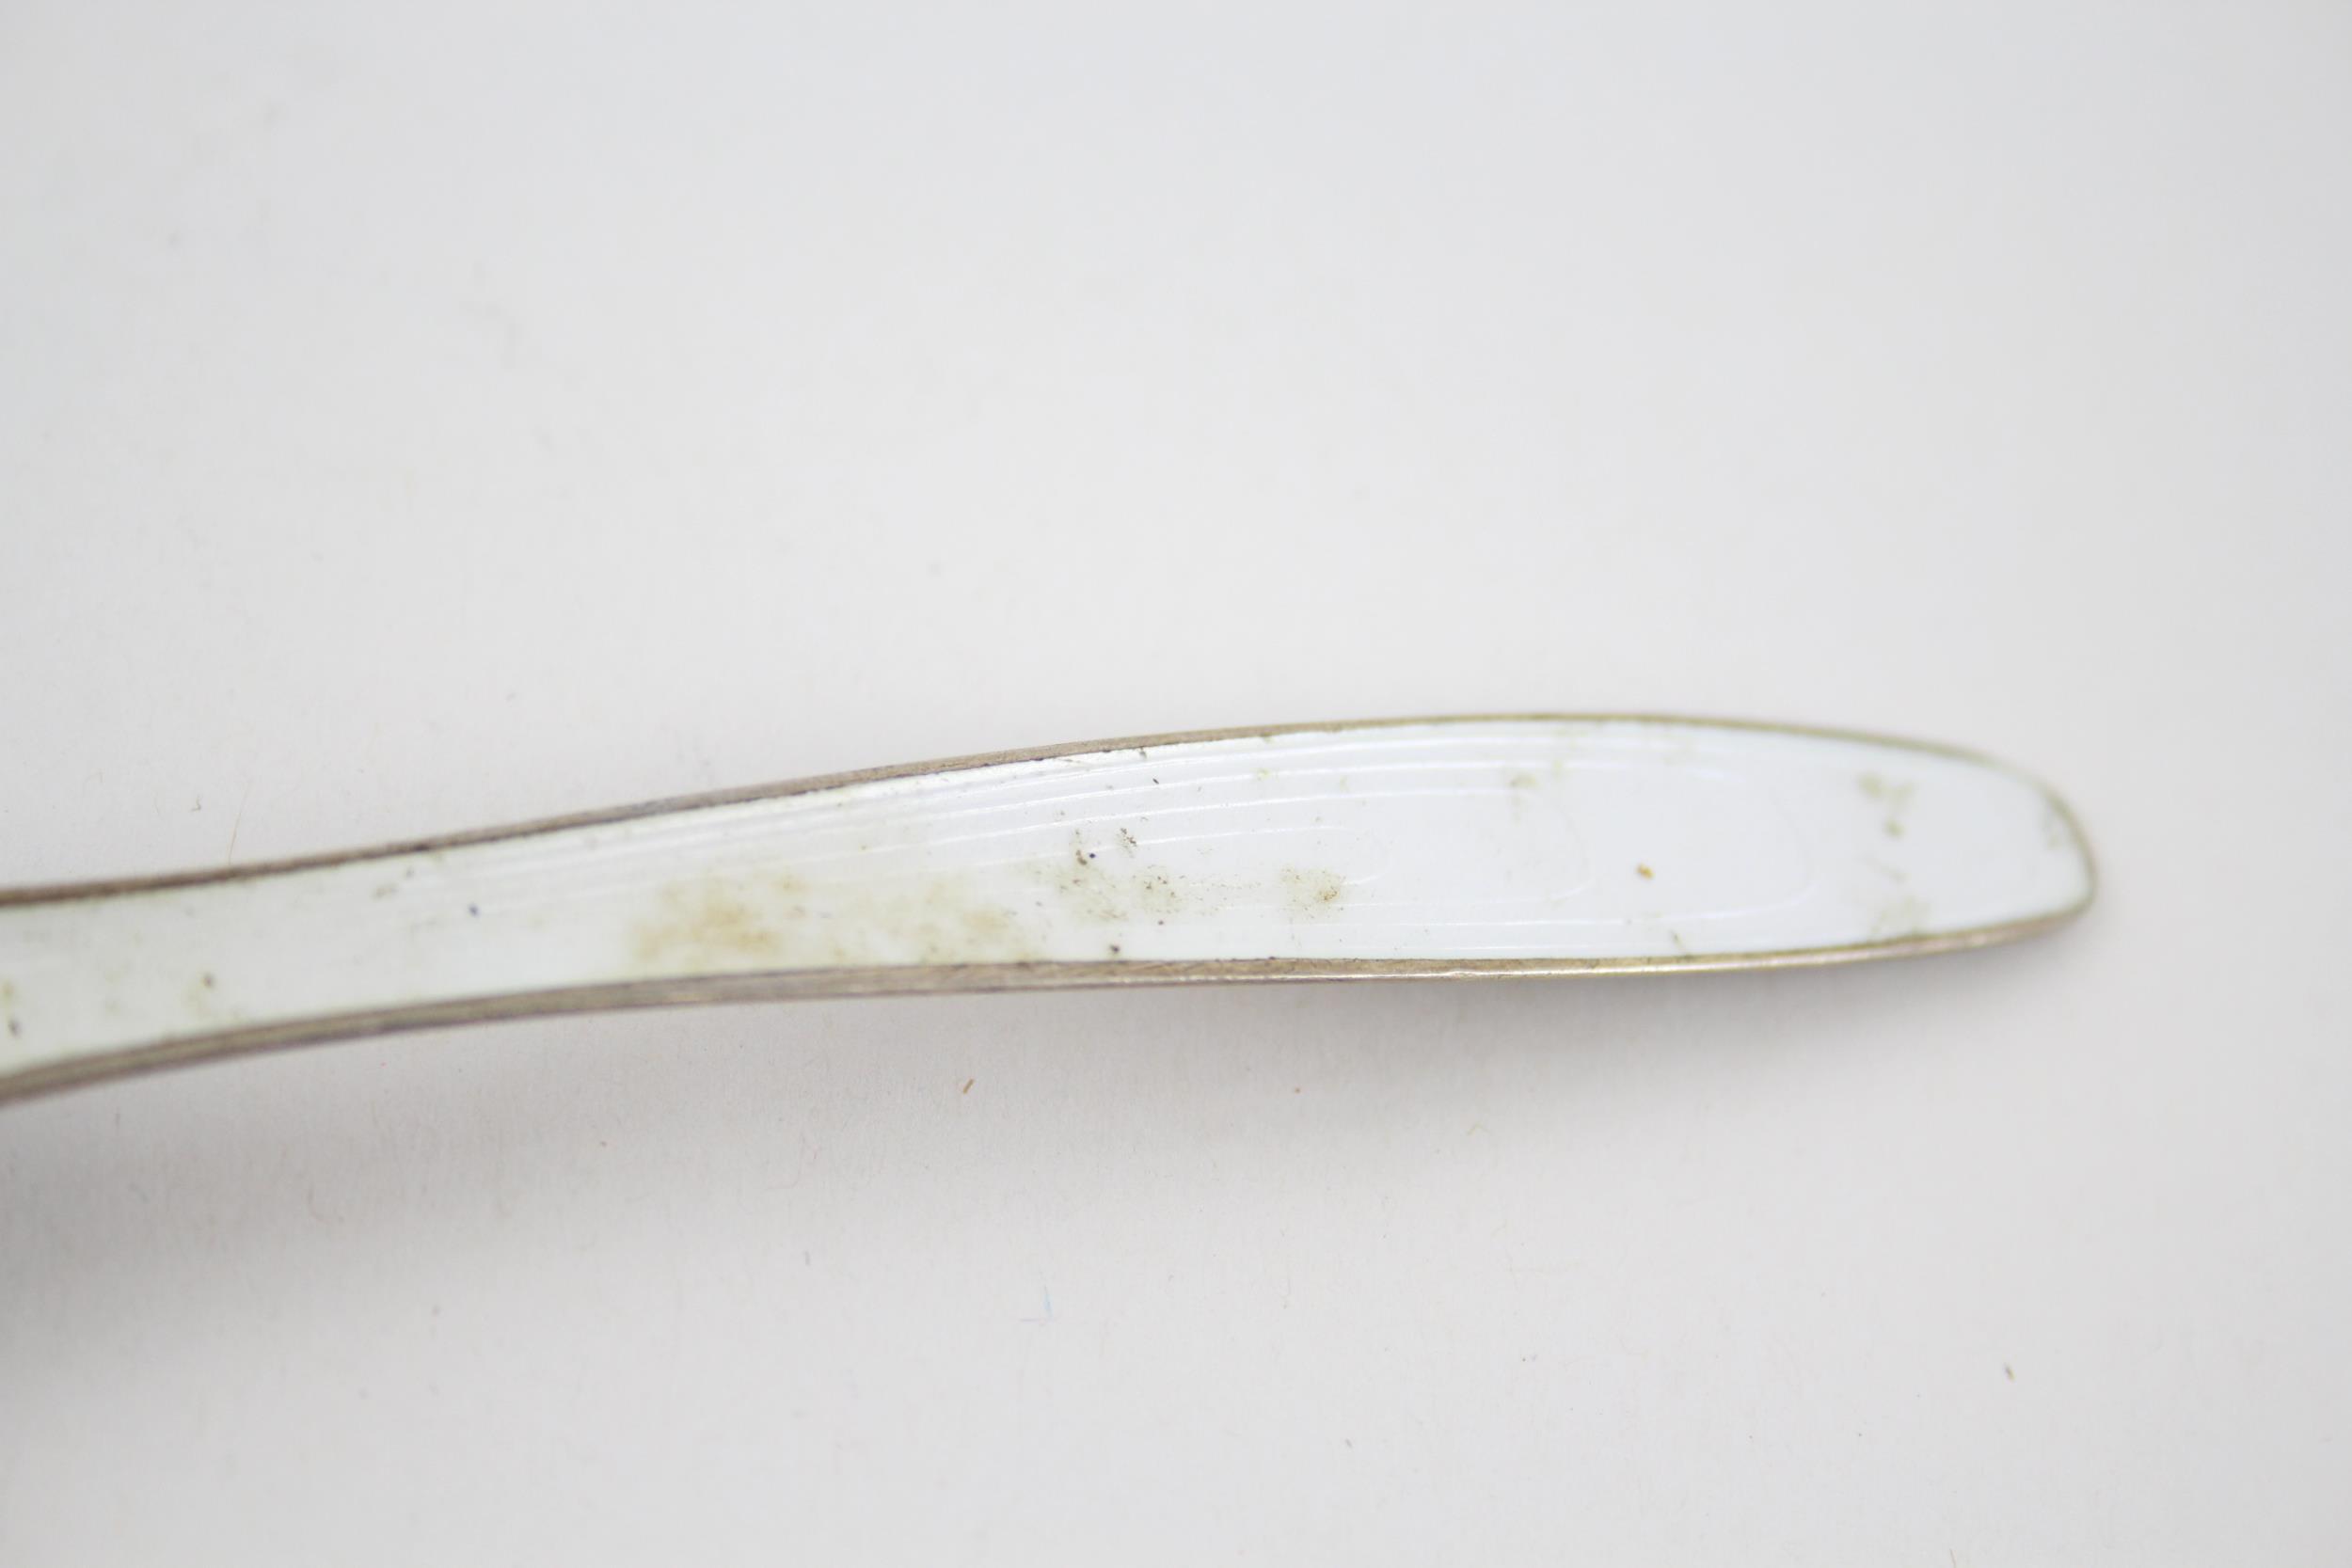 2 x Vintage Stamped .925 Sterling Silver White Guilloche Enamel Spoon & Salt 53g - Inc Norway - Image 3 of 7